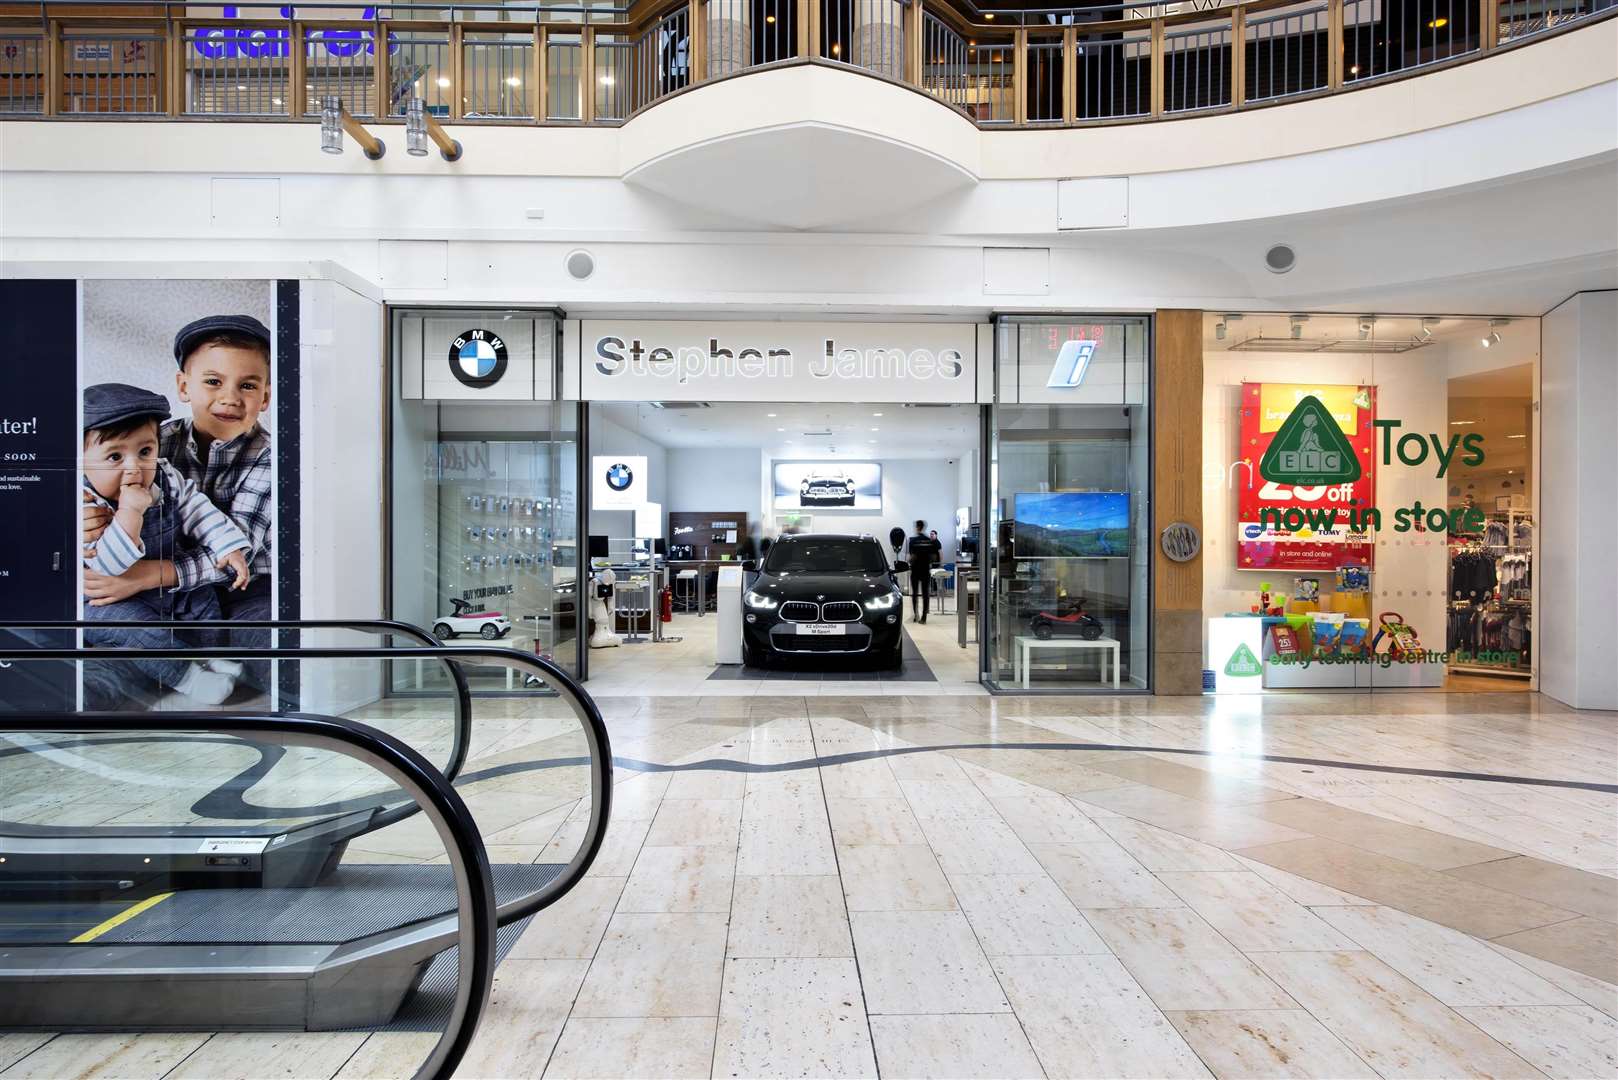 BMW Urban store at Bluewater (1701990)